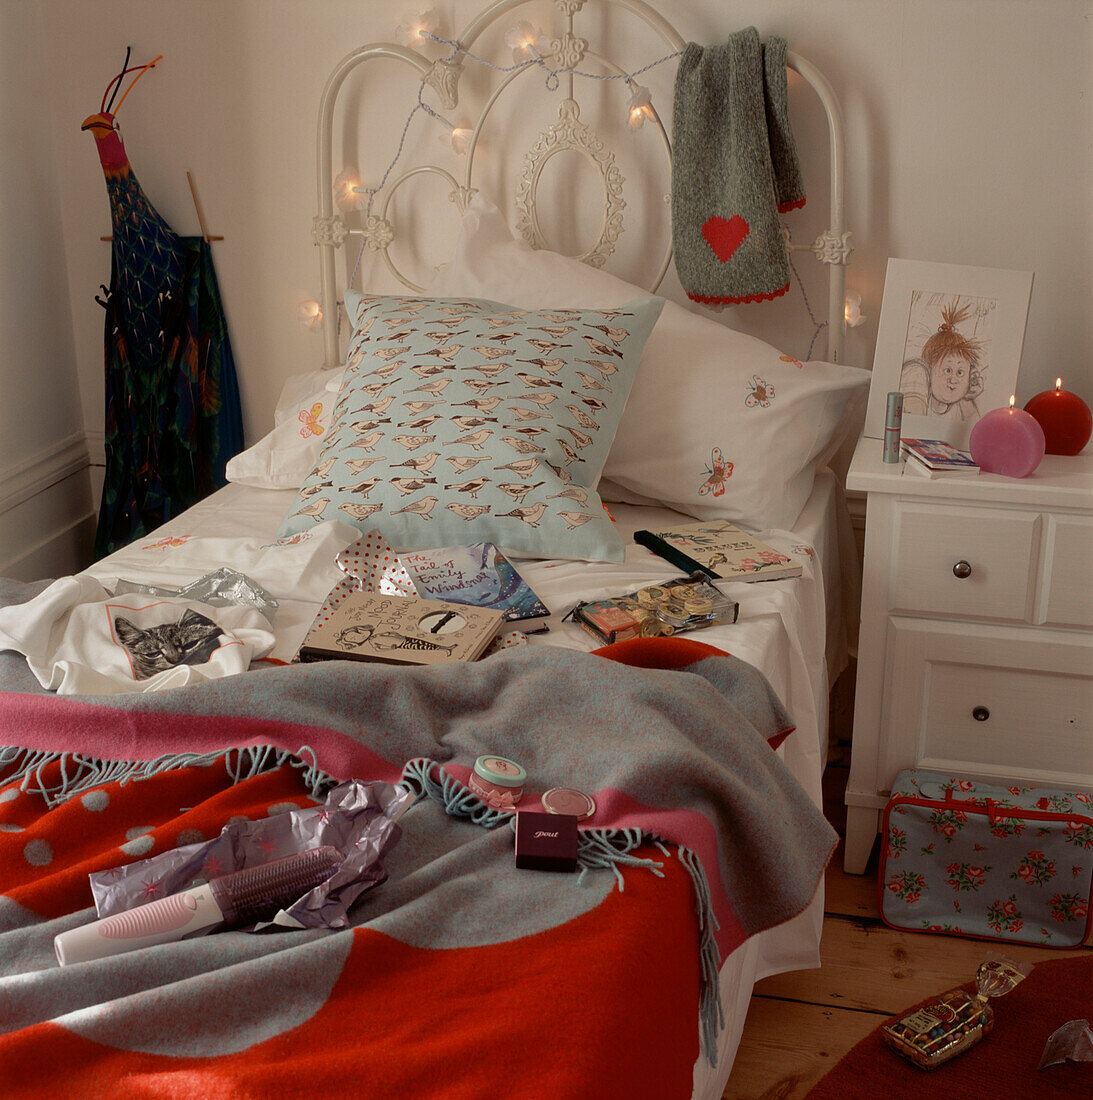 Teenage bedroom full of opened gifts displayed on the bed